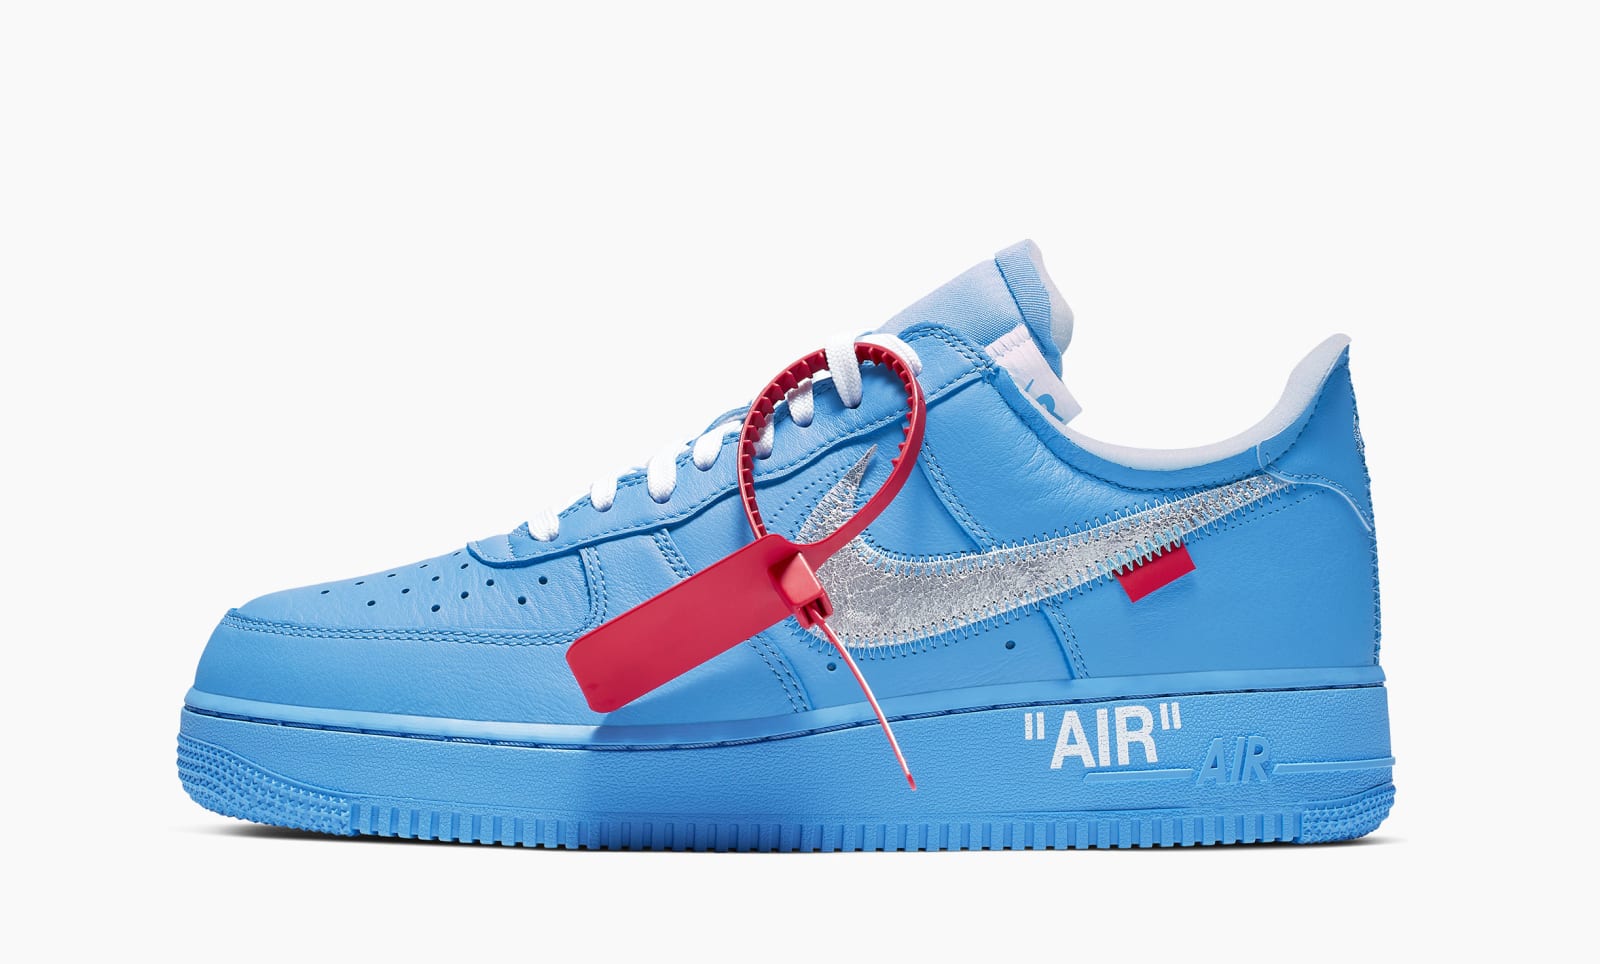 off white air force 1 red